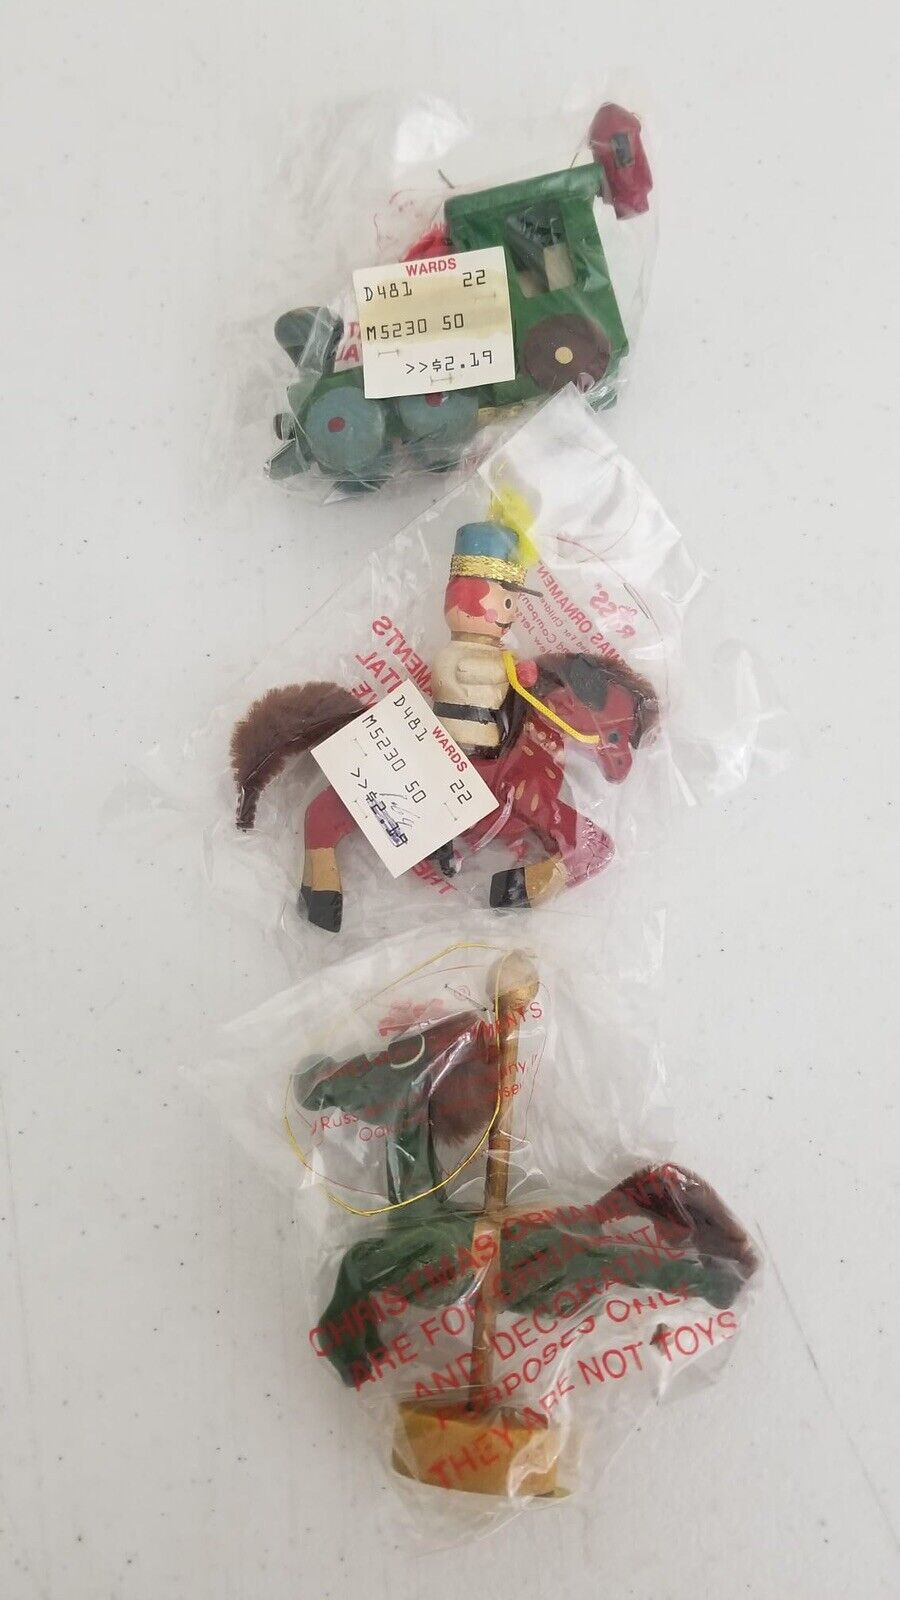 Rare Vintage Christmas Ornaments Set of 3 - Handcrafted Wooden Collectibles in Original Sealed Packaging - TreasuTiques